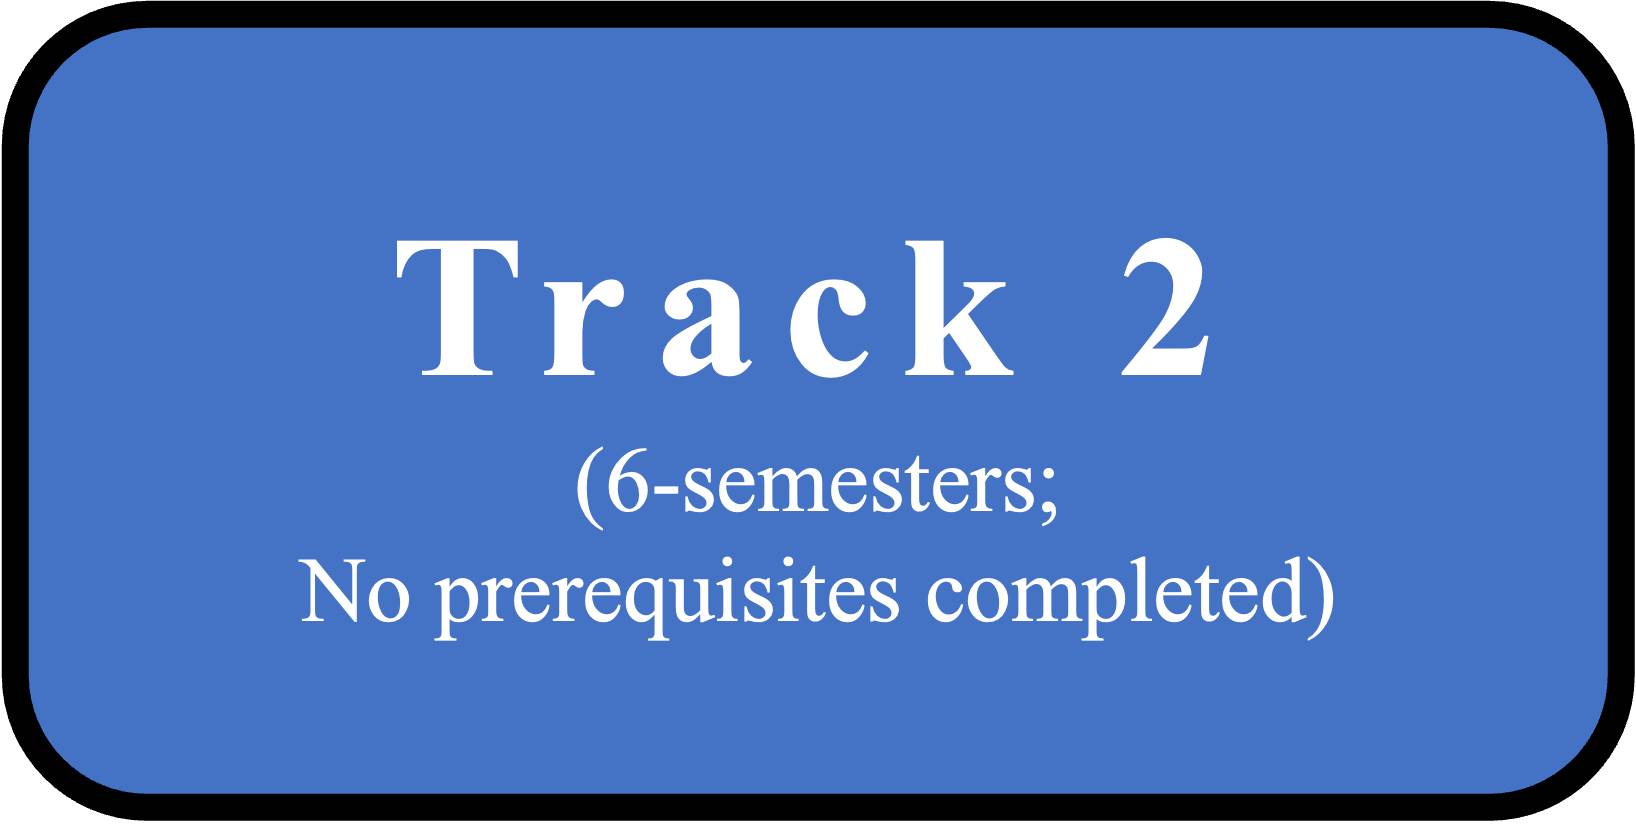 Track 2 - 6-semester program with no prerequisites completed